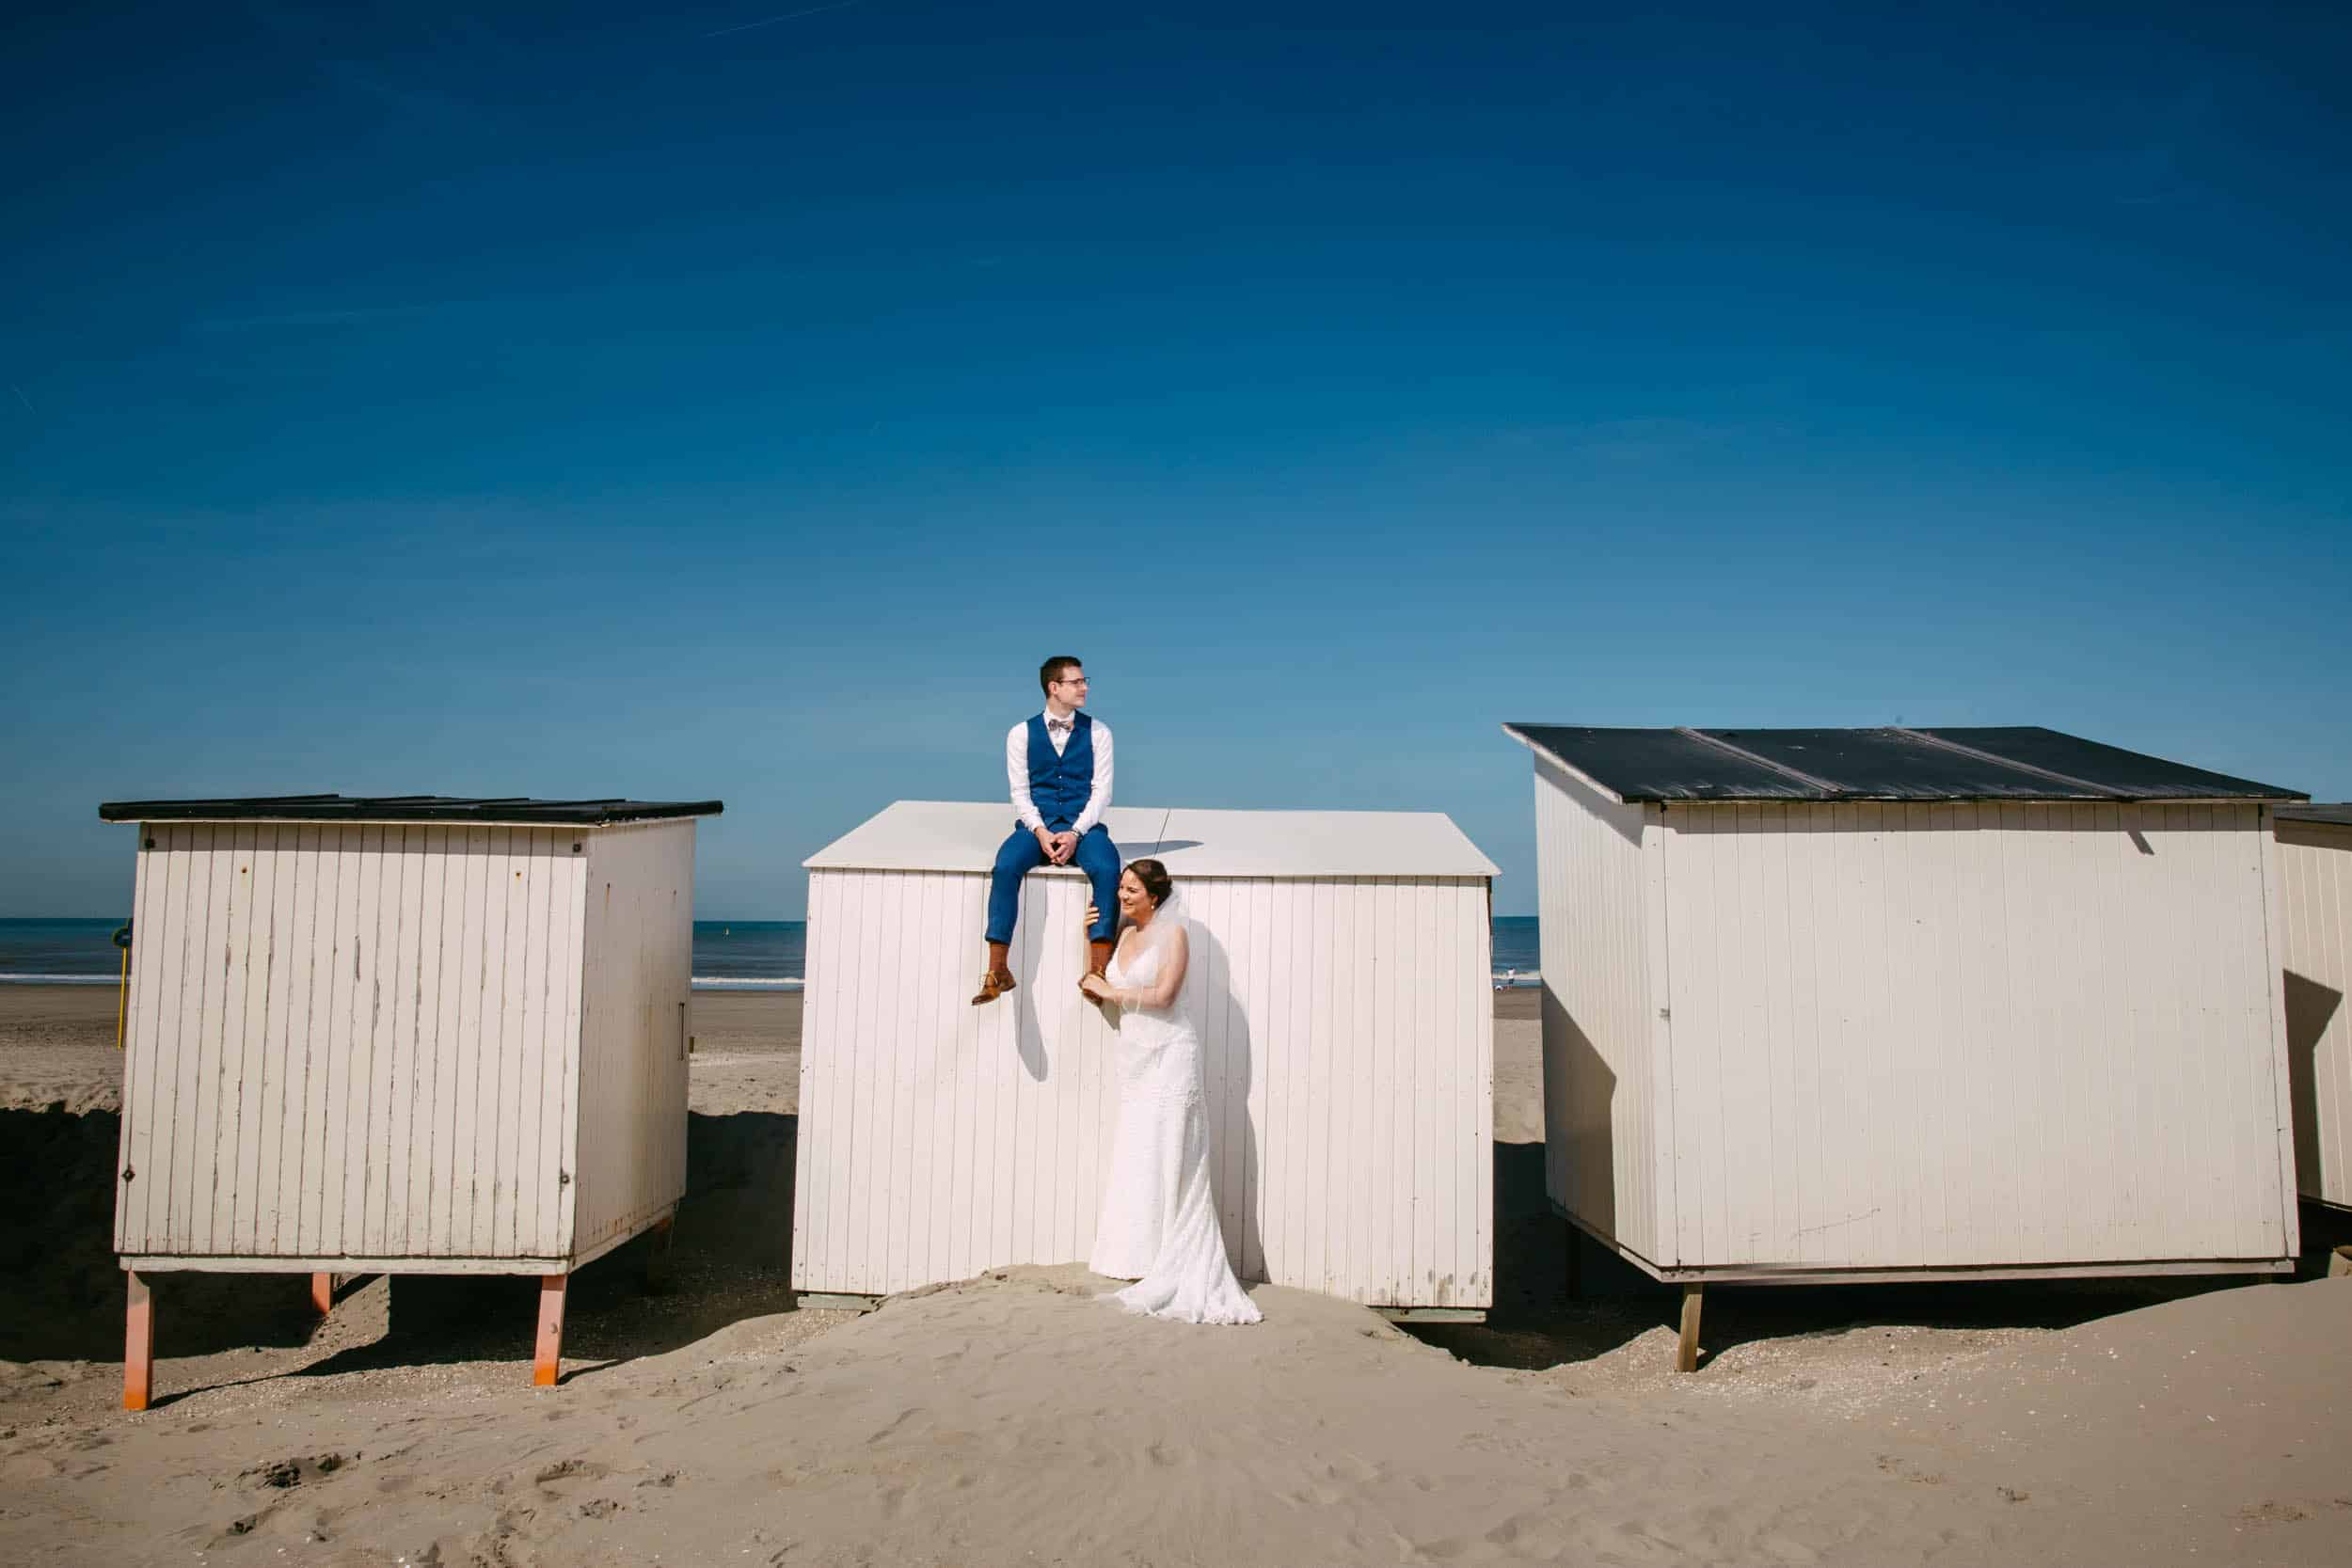 A bride and groom standing atop beach huts, capturing the charming elements of a seaside wedding.